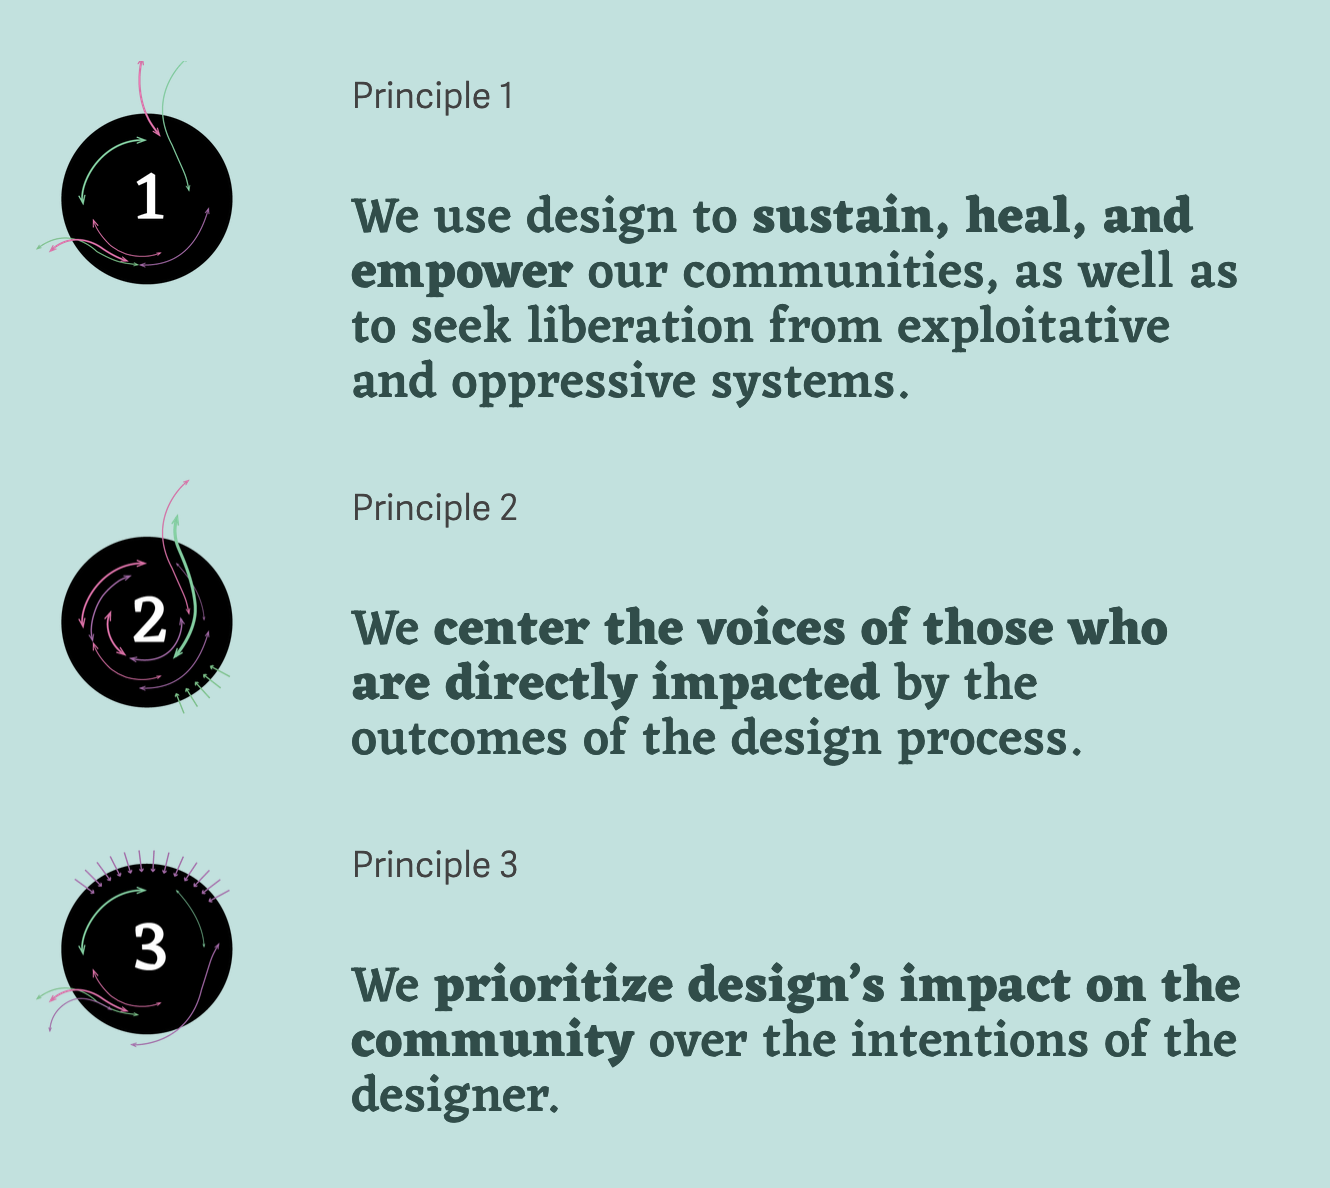 Screenshot of the first 3 Design Justice Network Principles: Principle 1: We use design to sustain, heal, and empower our communities, as well as to seek liberation from exploitative and oppressive systems. Principle 2: We center the voices of those who are directly impacted by the outcomes of the design process. Principle 3: We prioritize design’s impact on the community over the intentions of the designer.